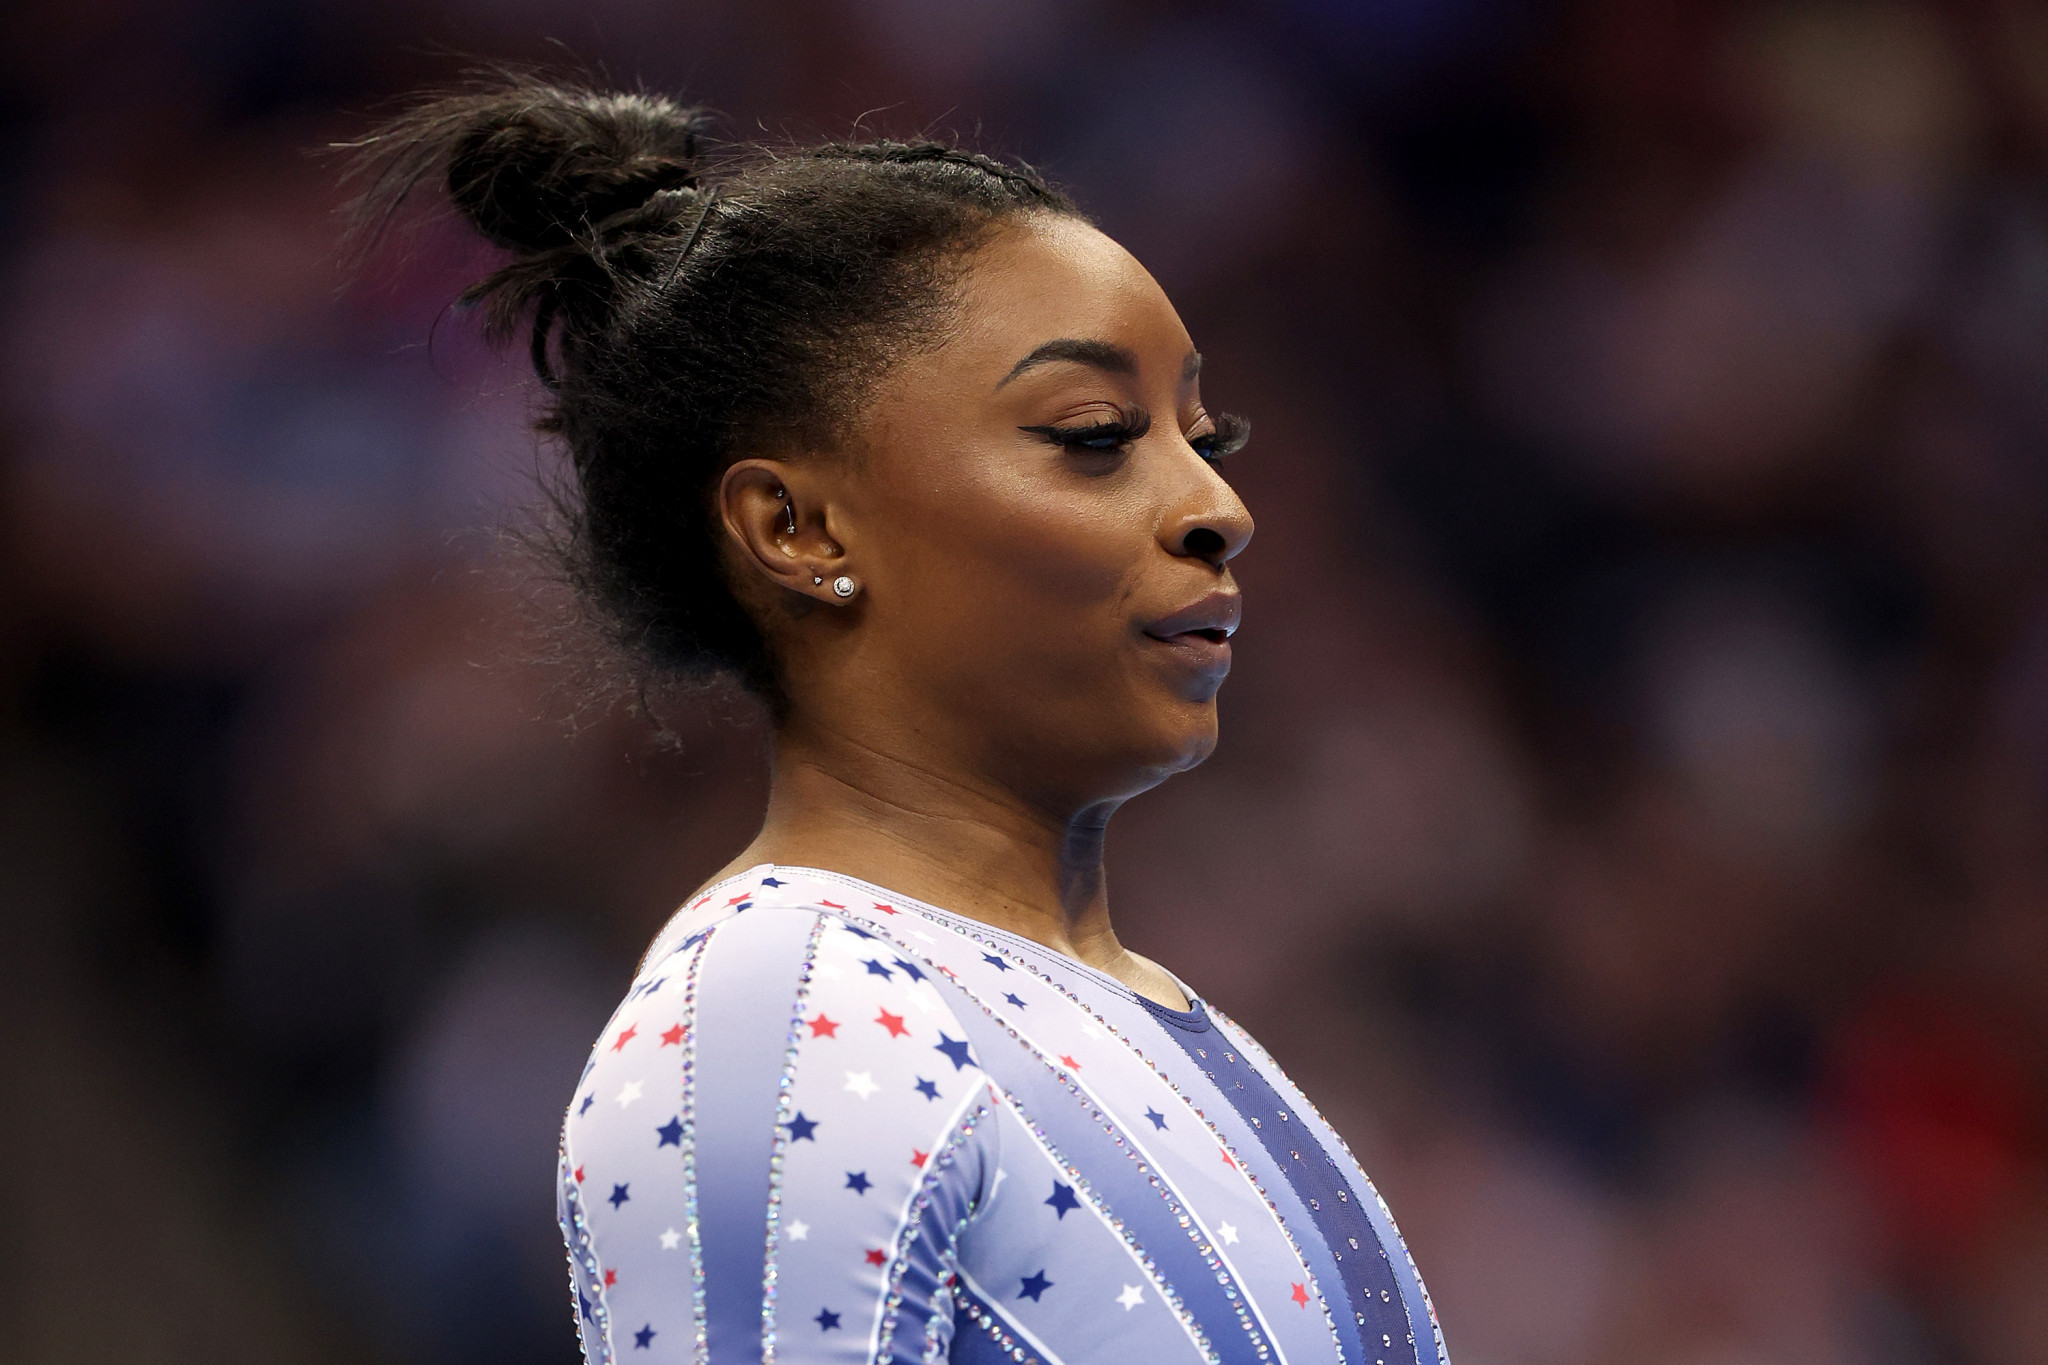 Simone Biles gave team USA the golden medals. GETTY IMAGES